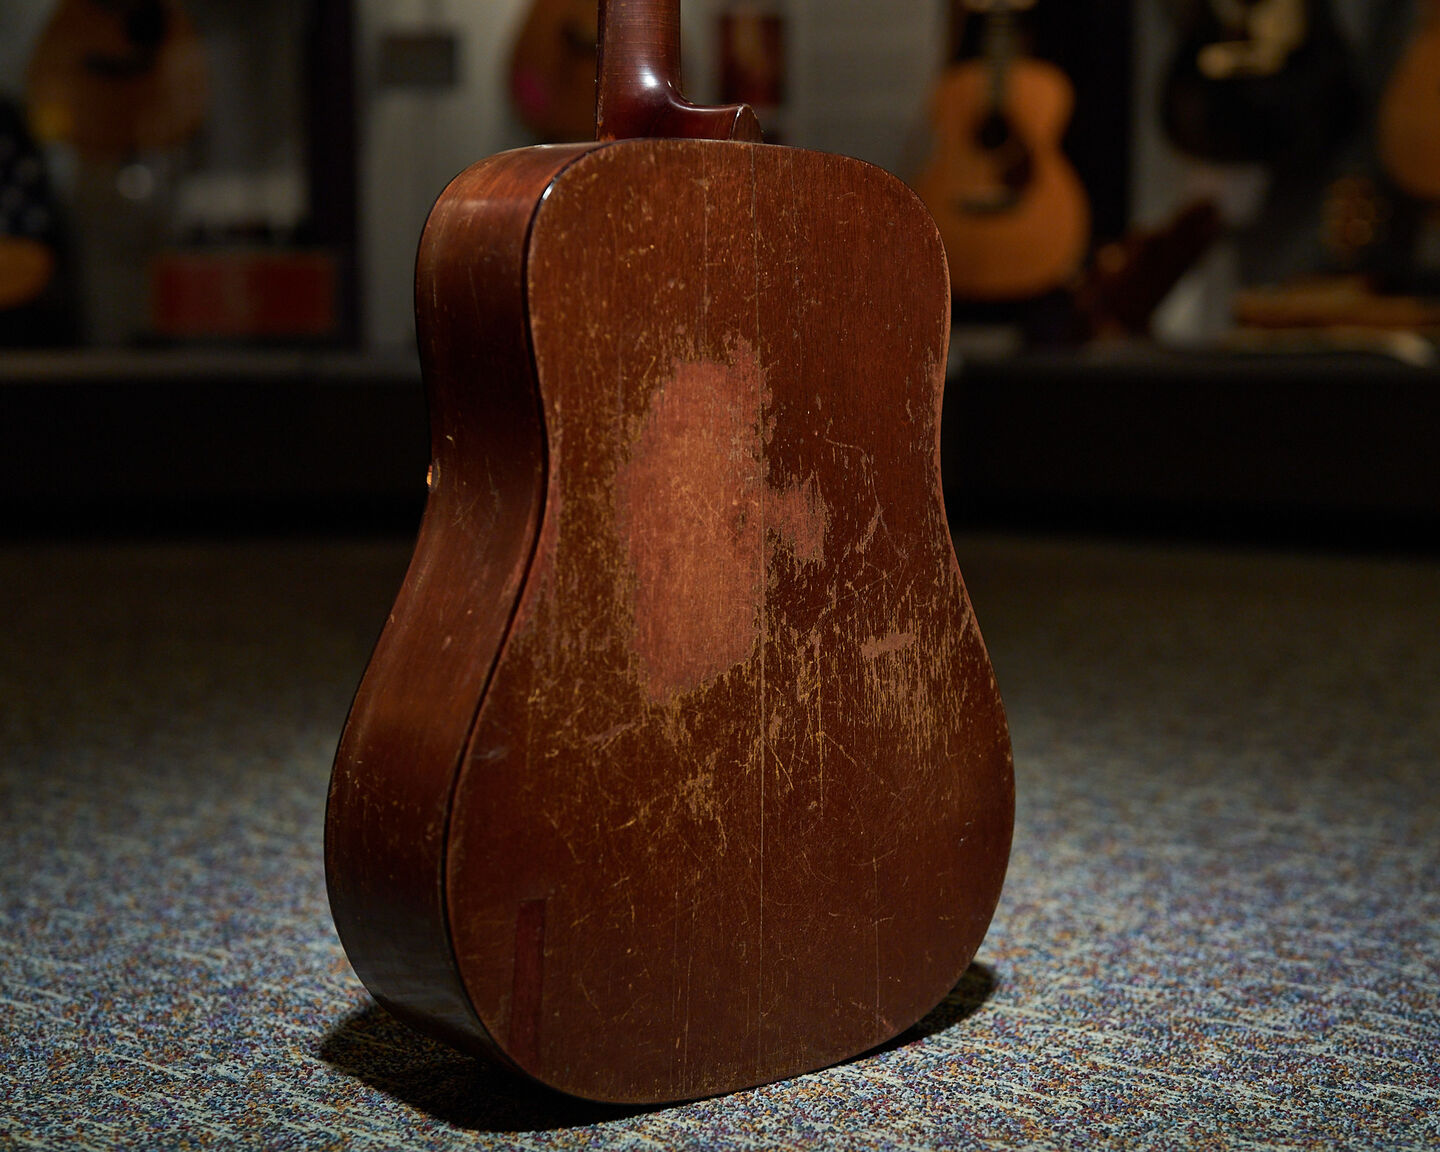 Back of an acoustic guitar